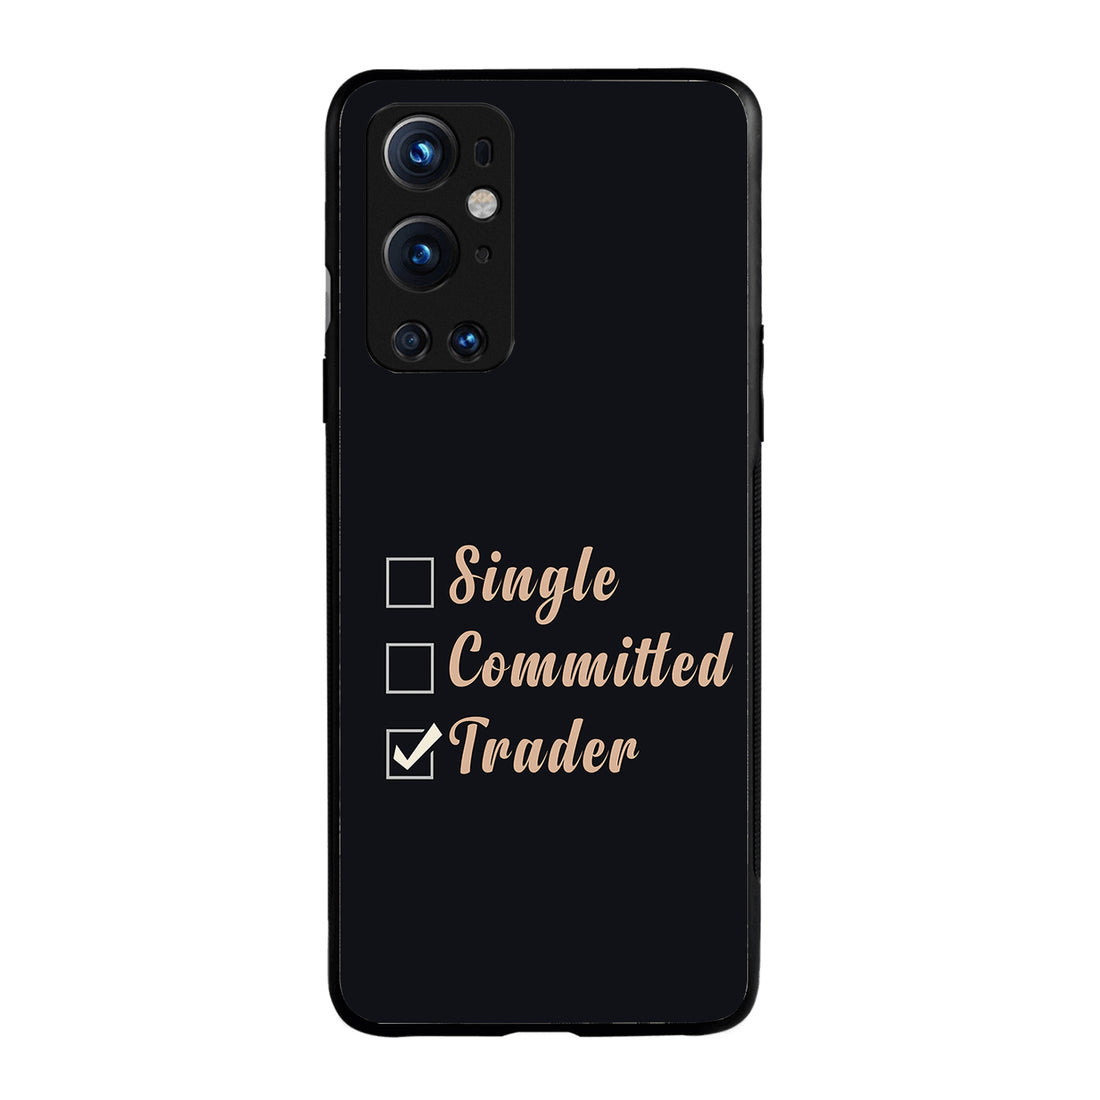 Single, Commited, Trader Trading Oneplus 9 Pro Back Case